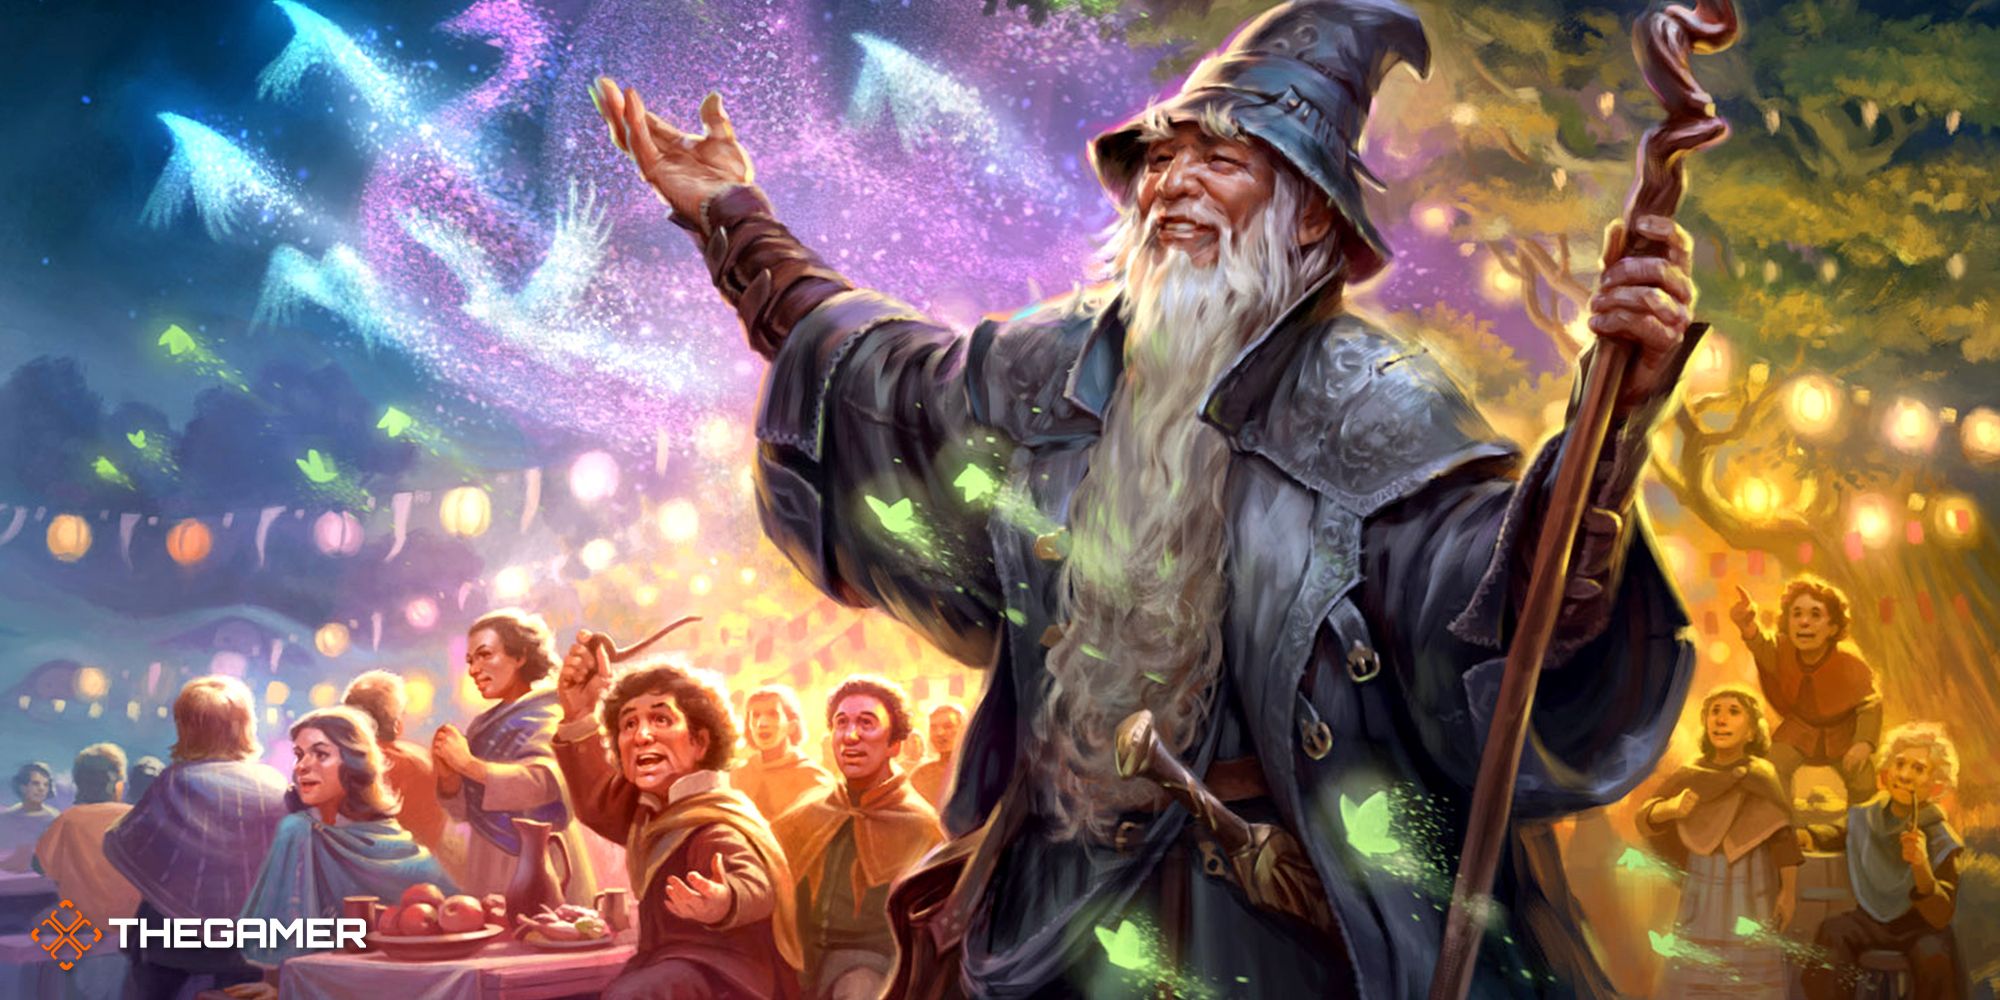 Lord of the Rings: Magic: The Gathering's Lord of the Rings preview reveals  familiar characters - Frodo, Gollum, Samwise, and more